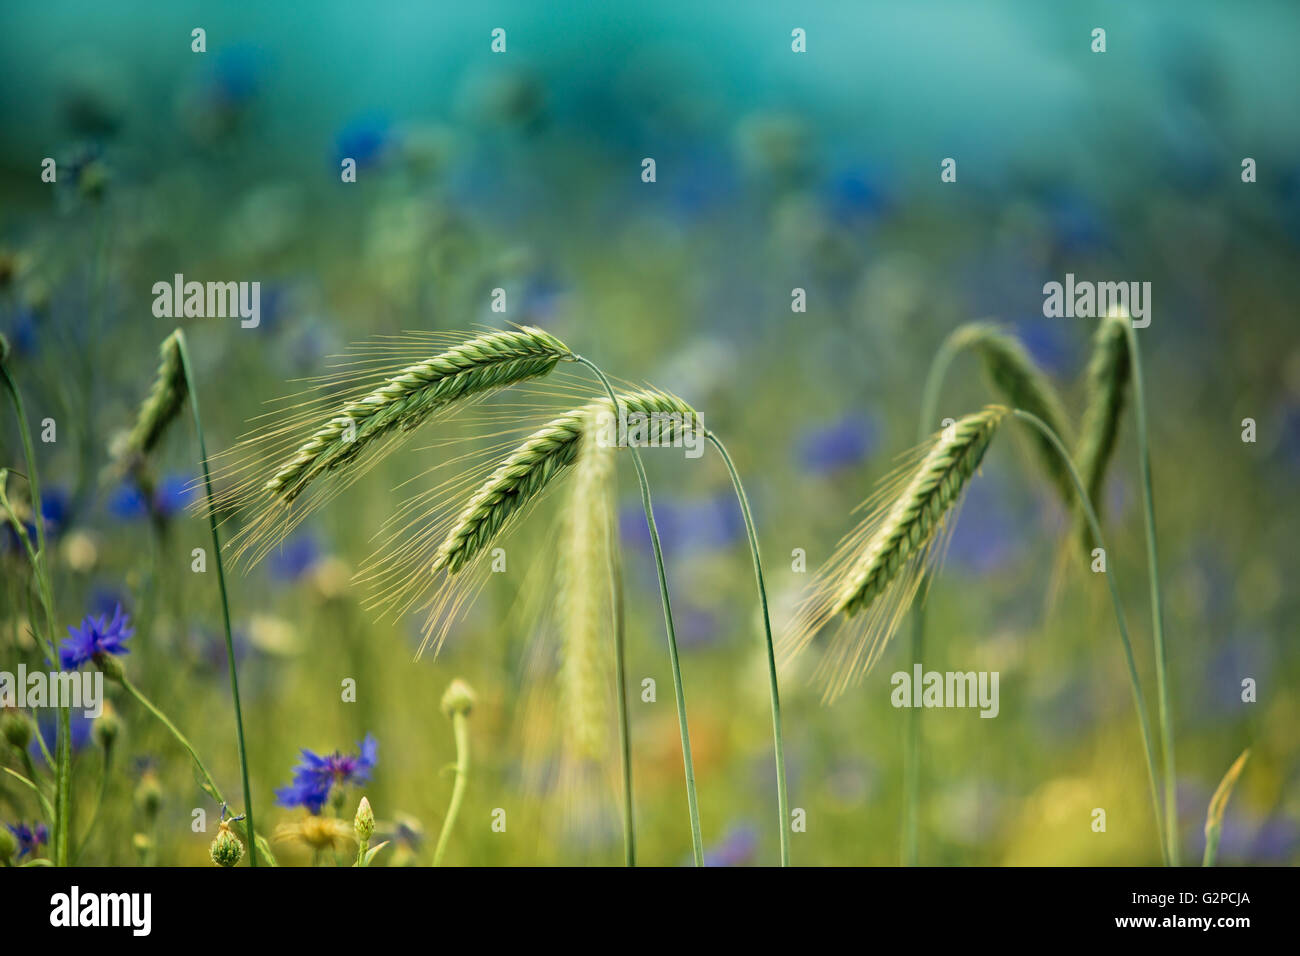 Field of Wheat with Corn Flowers in Summer Stock Photo